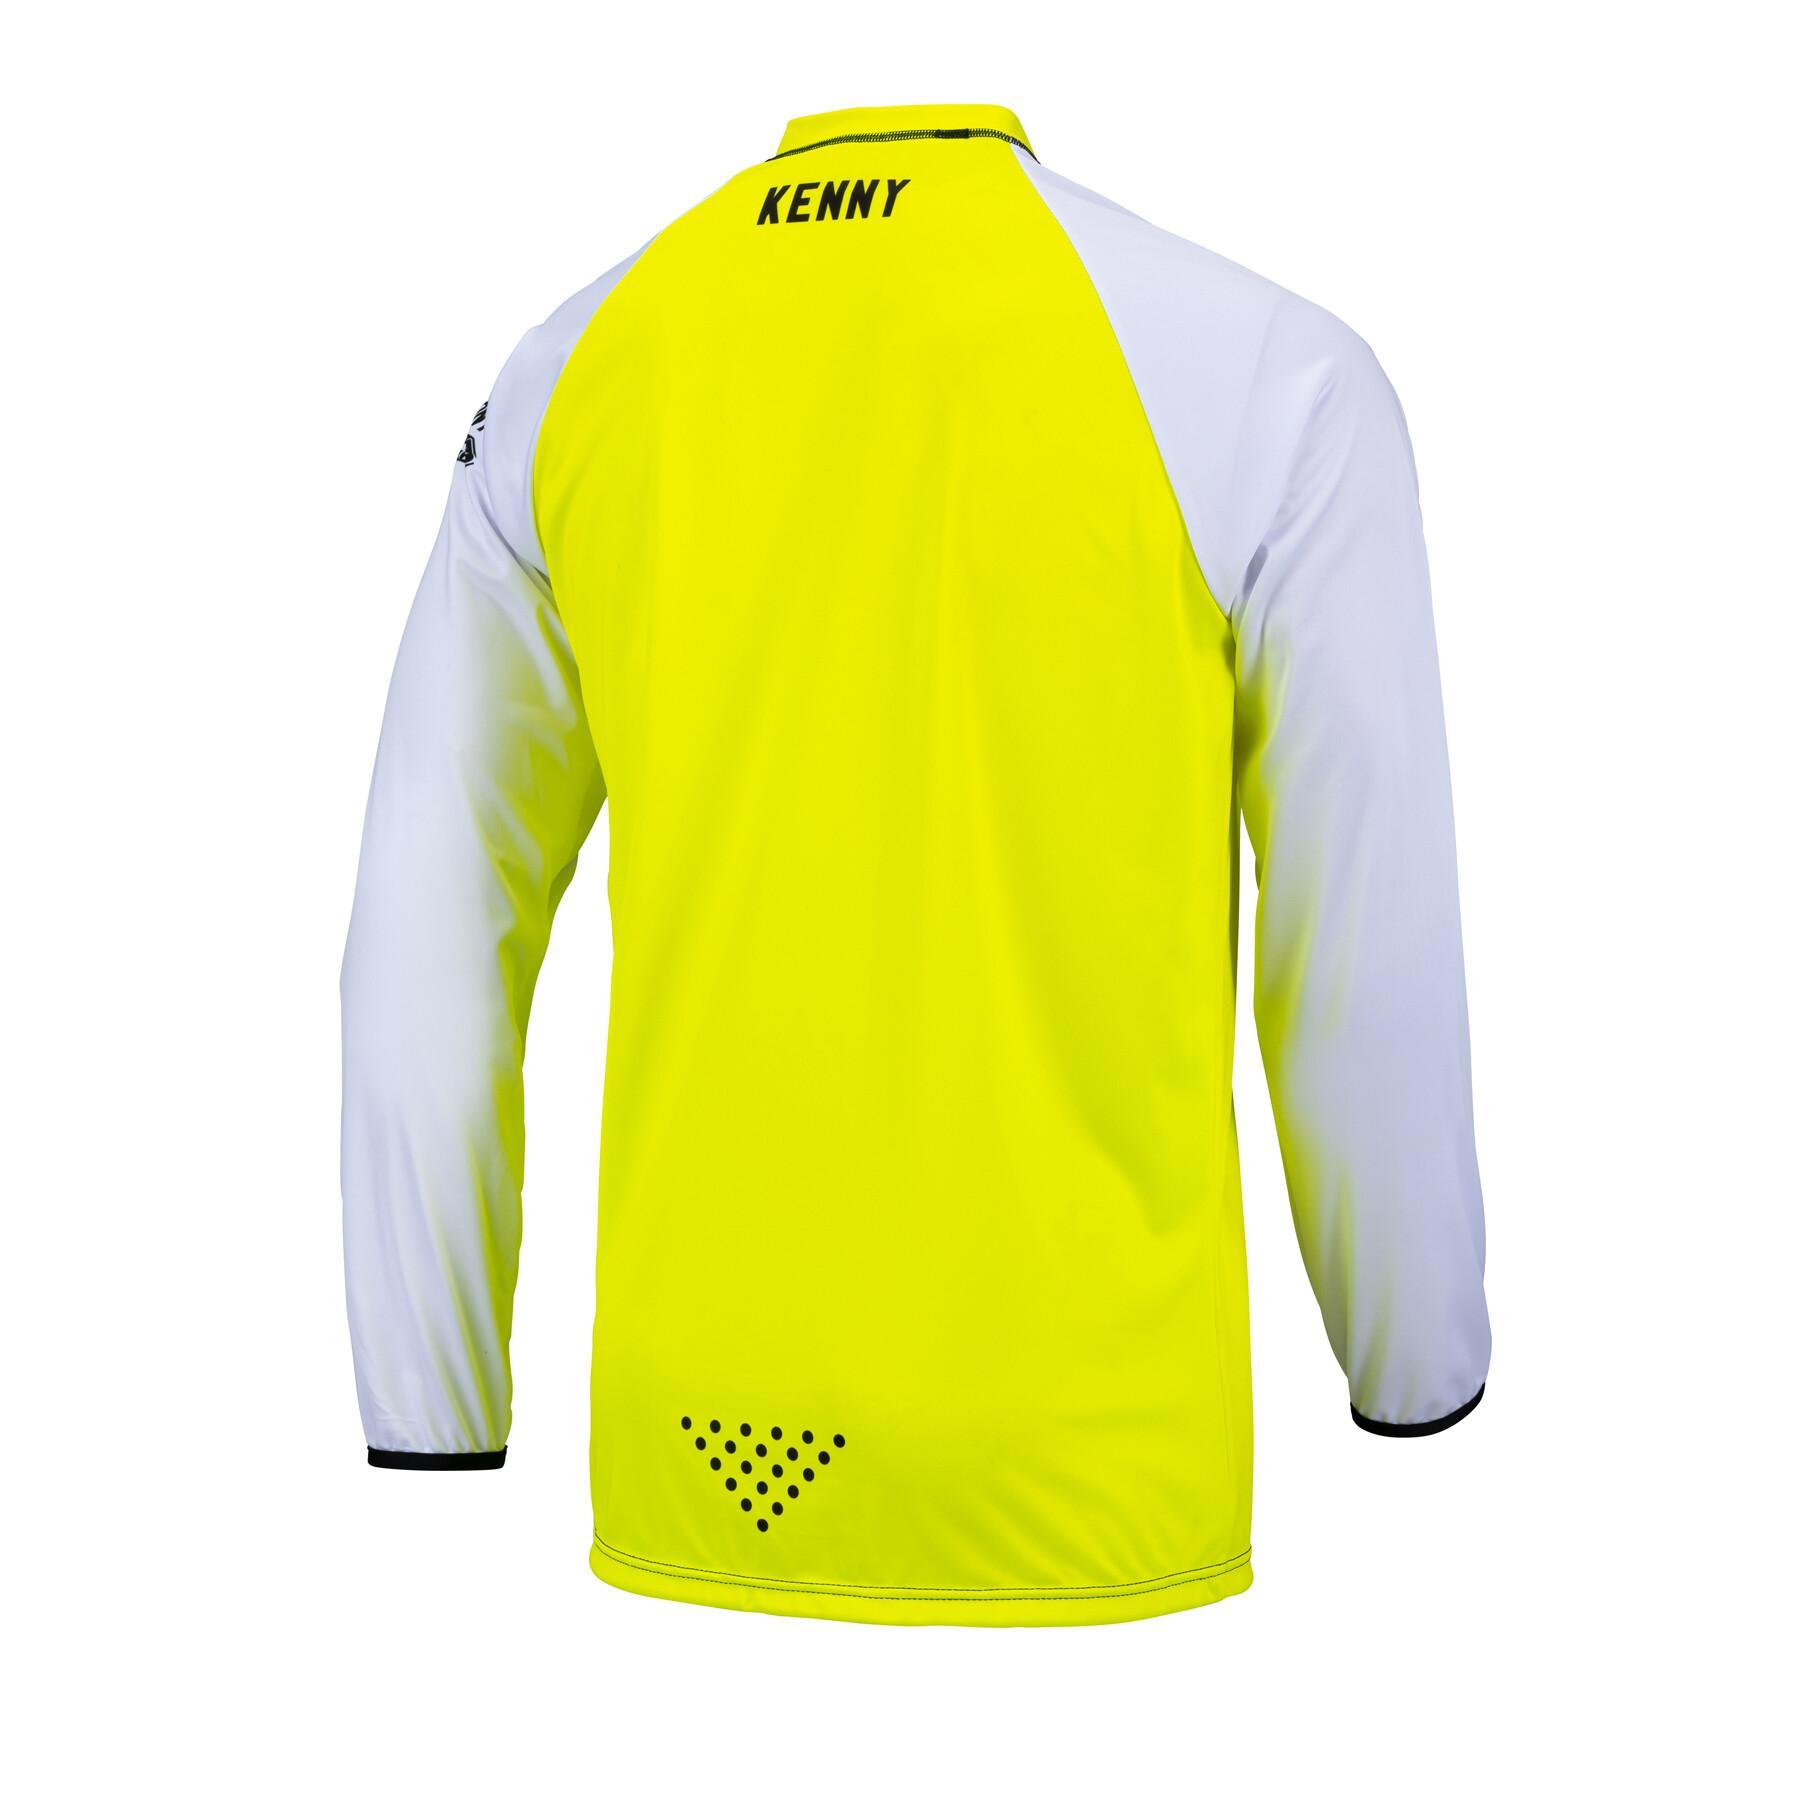 Maillot manches longues Kenny Defiant